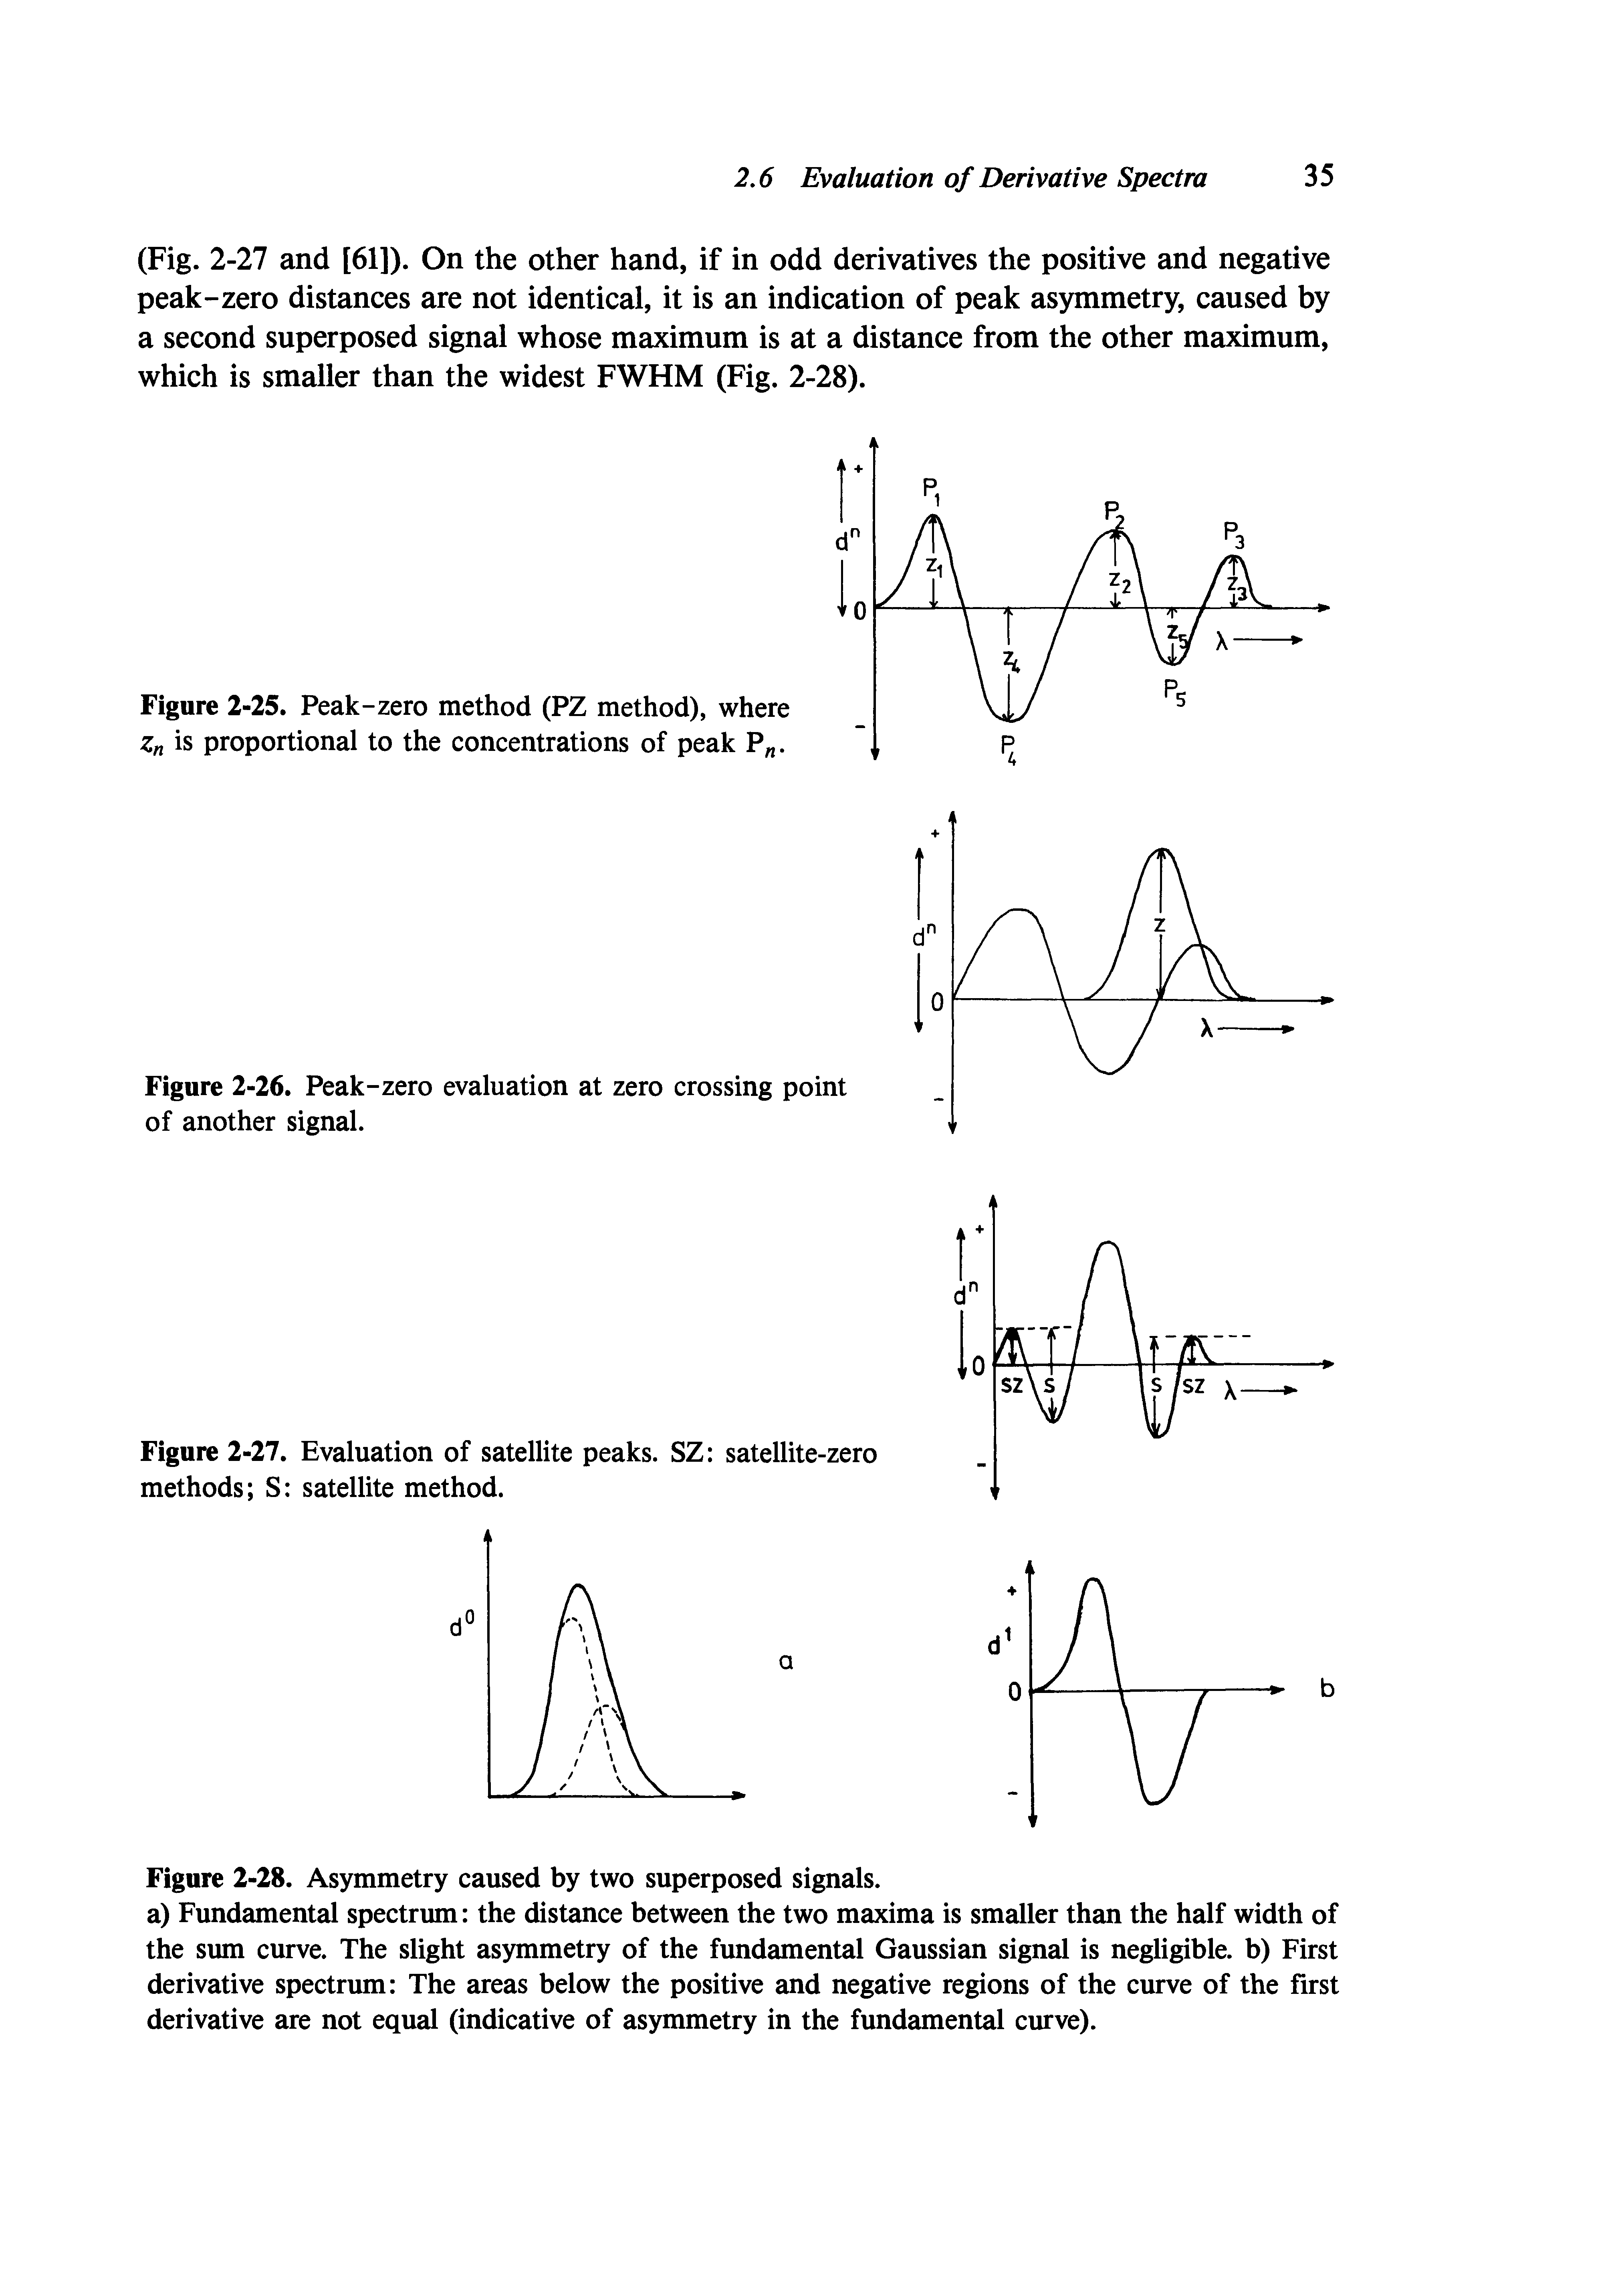 Figure 2-25. Peak-zero method (PZ method), where Zn is proportional to the concentrations of peak P .